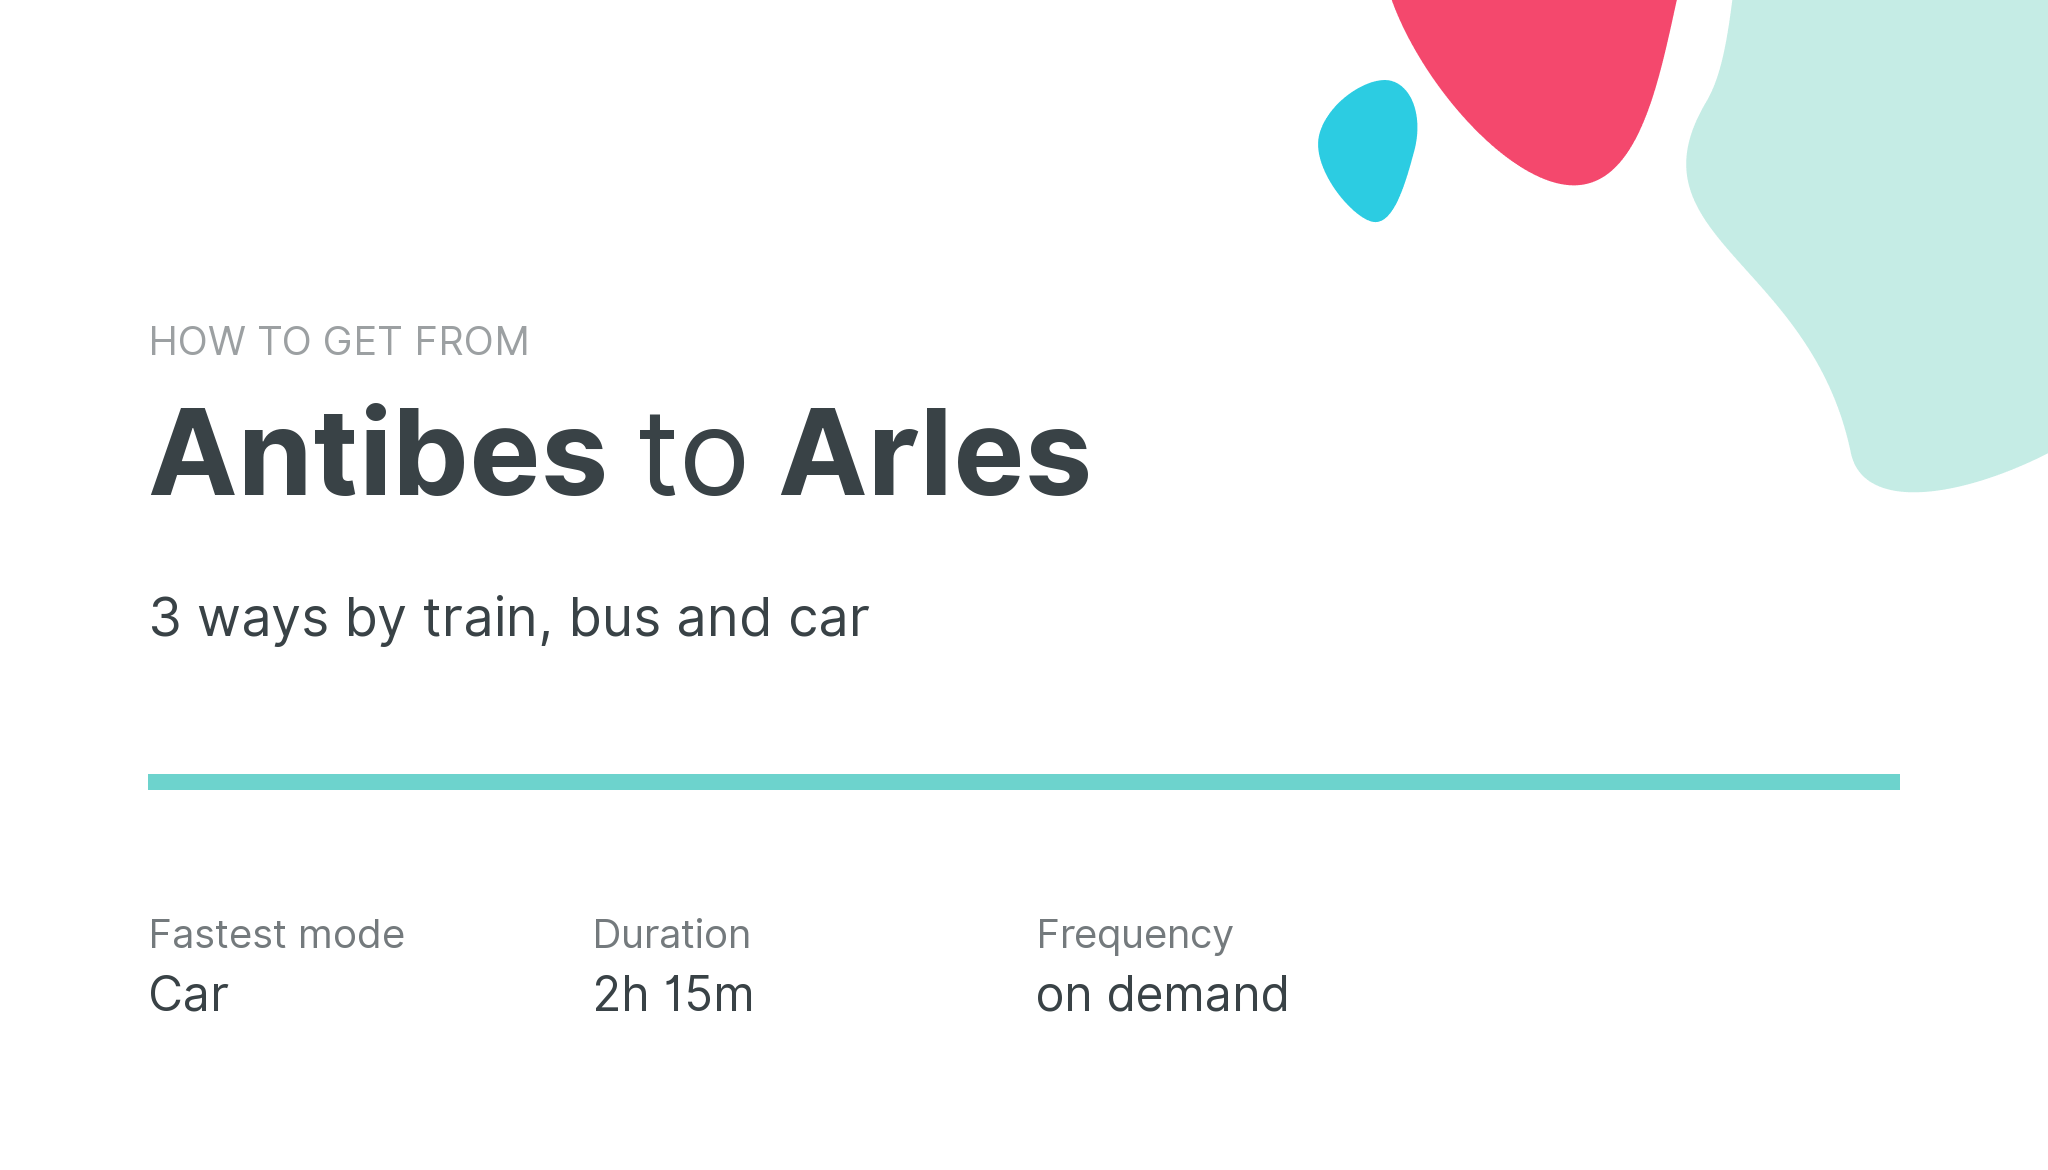 How do I get from Antibes to Arles